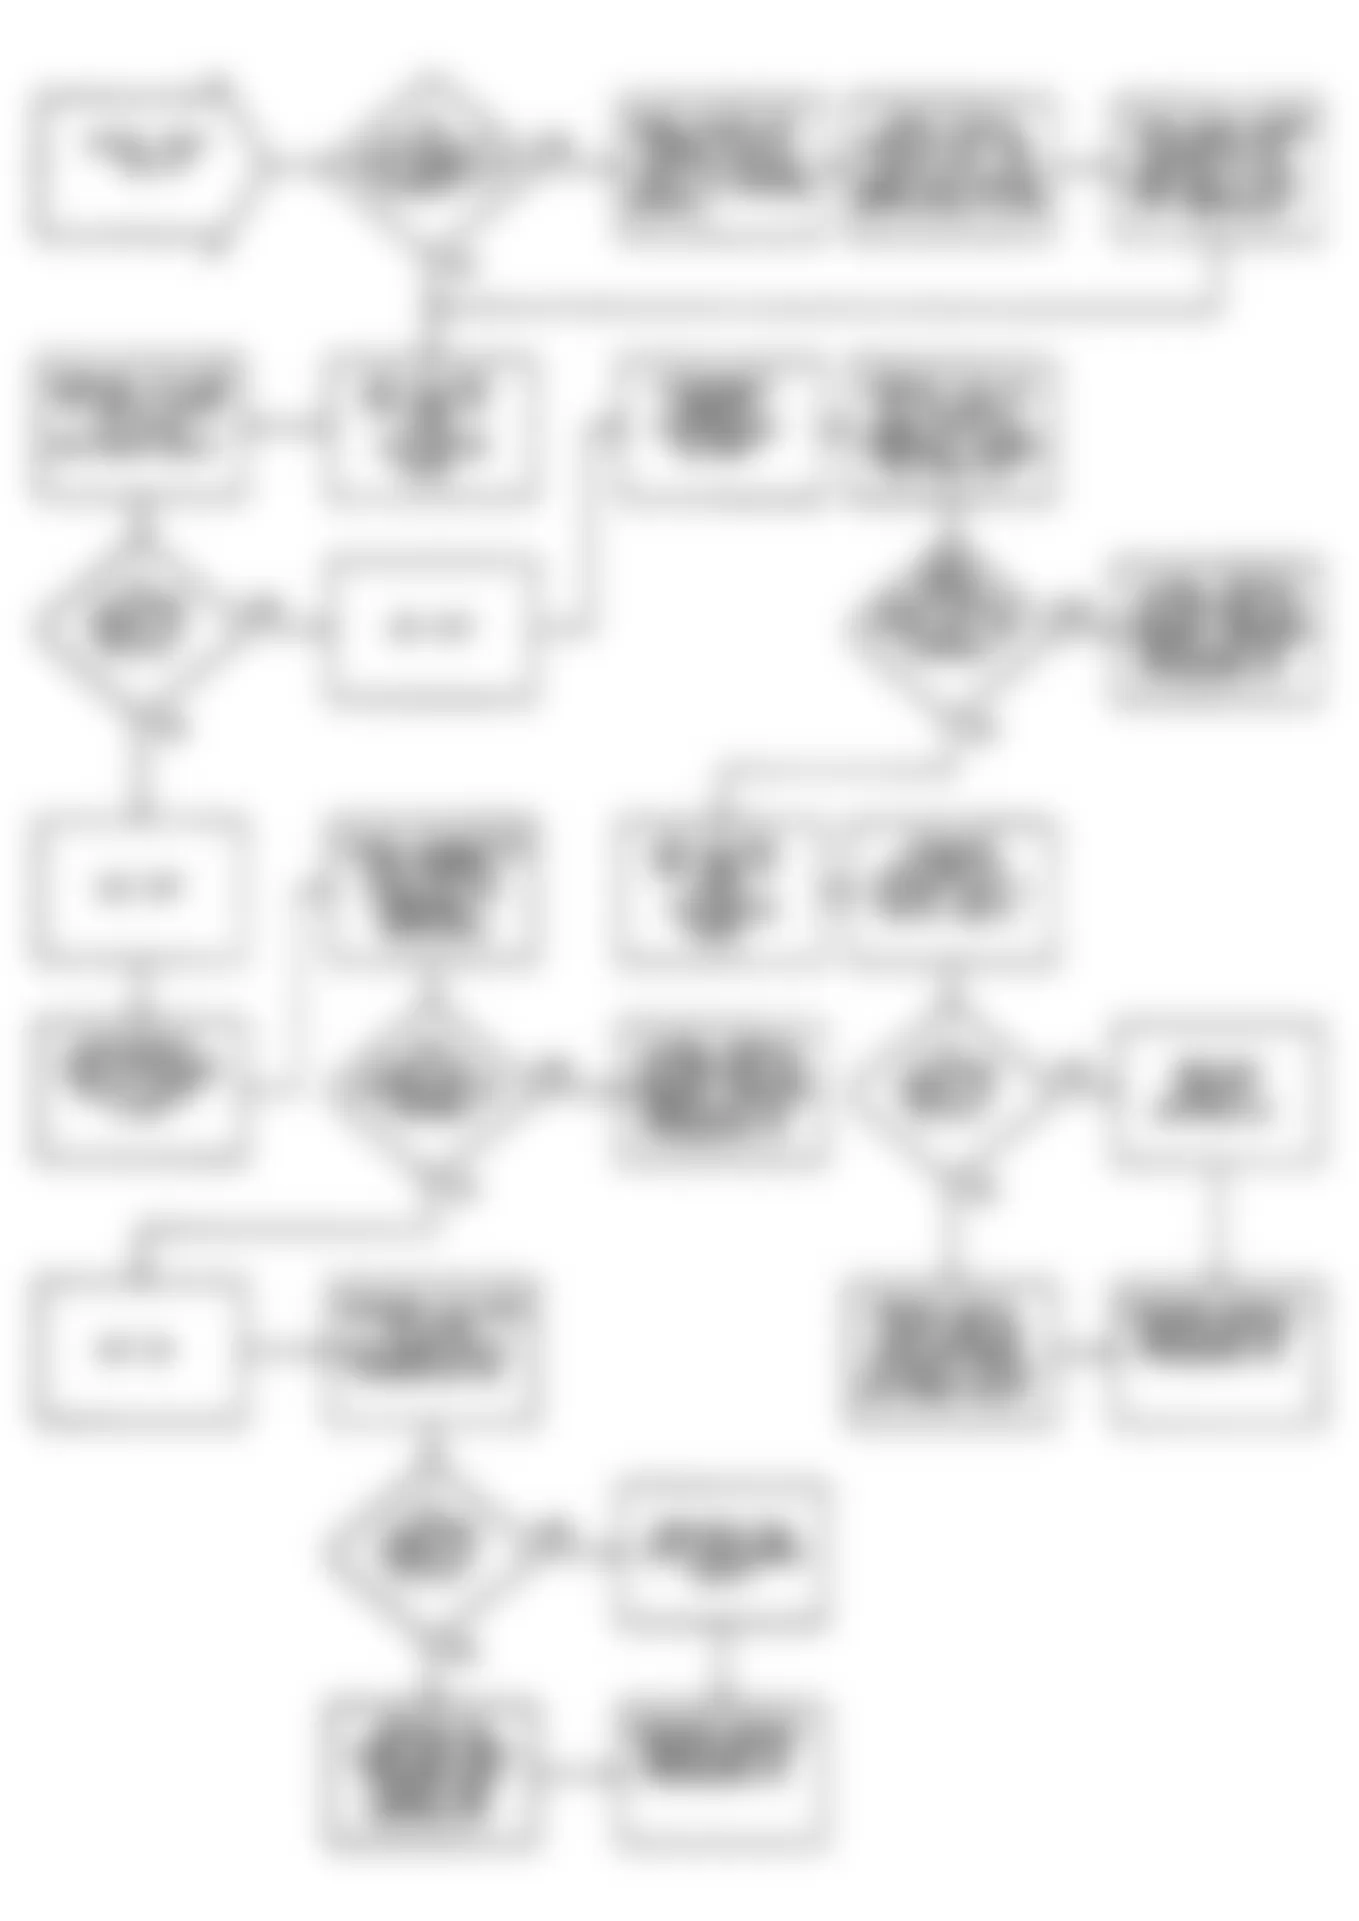 Chrysler LeBaron 1990 - Component Locations -  NS-14: Flow Chart